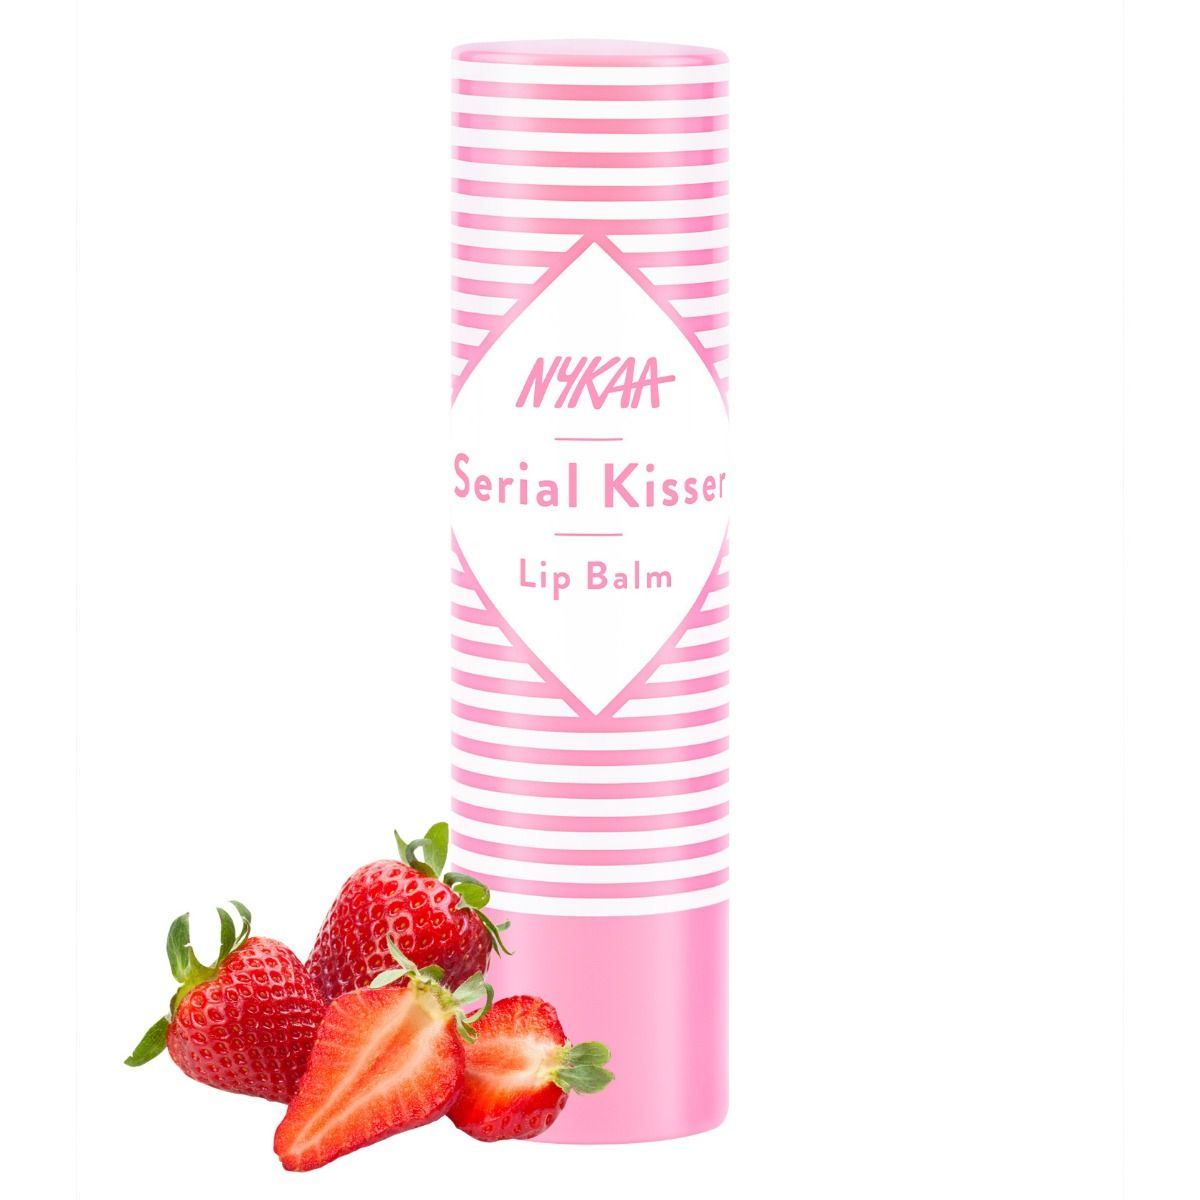 Nykaa Serial Kisser Strawberry Flavour Lip Balm, 4.5 gm, Pack of 1 